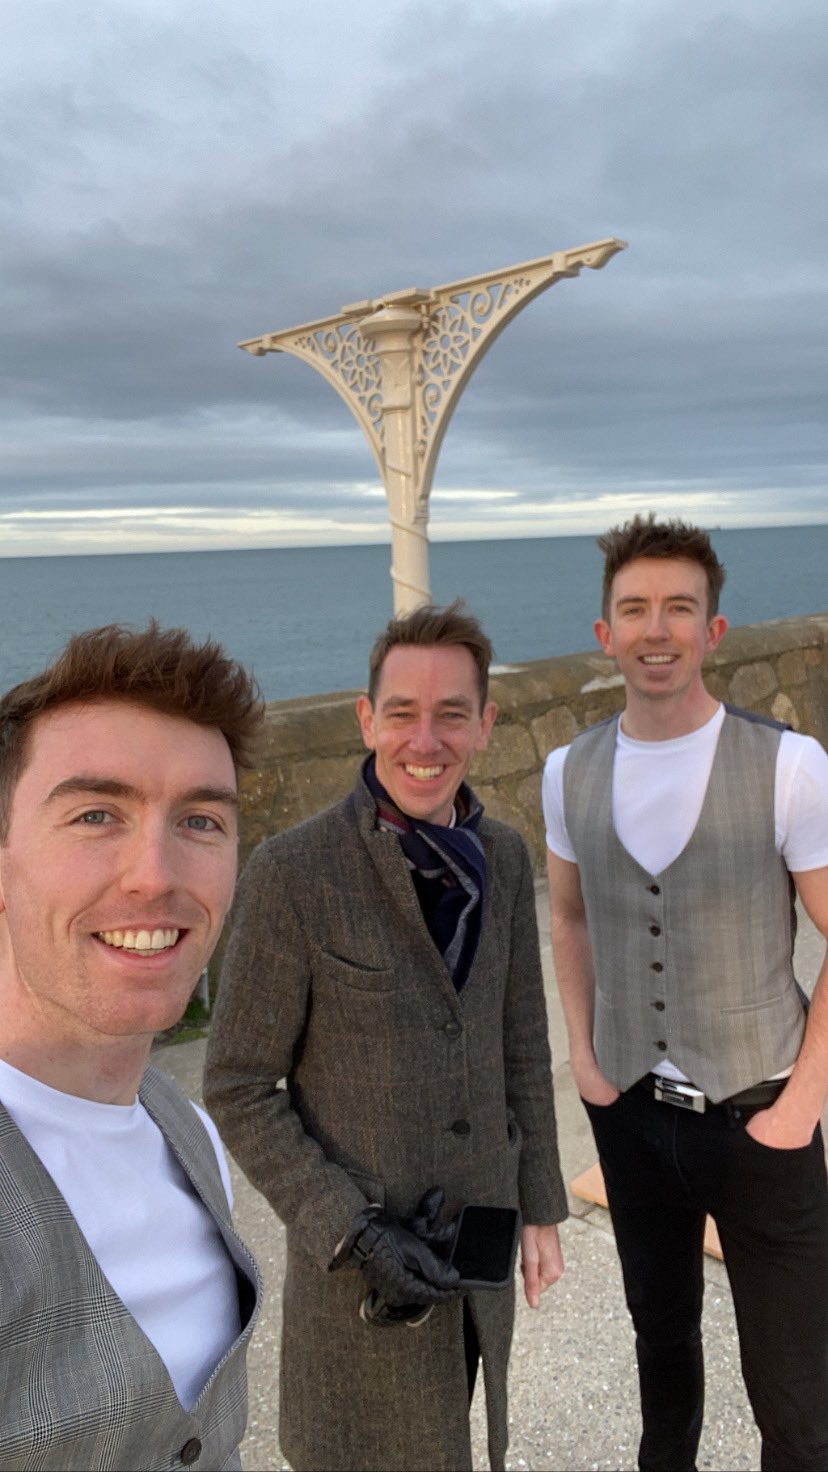 Landsdækkende klimaks identifikation Gardiner Brothers on Twitter: "We had an extra boost of energy today when  we bumped into @RyanTubridyShow while shooting a video! Who wants to see  Ryan in one of our videos? 😉🕺#ryantubridy #